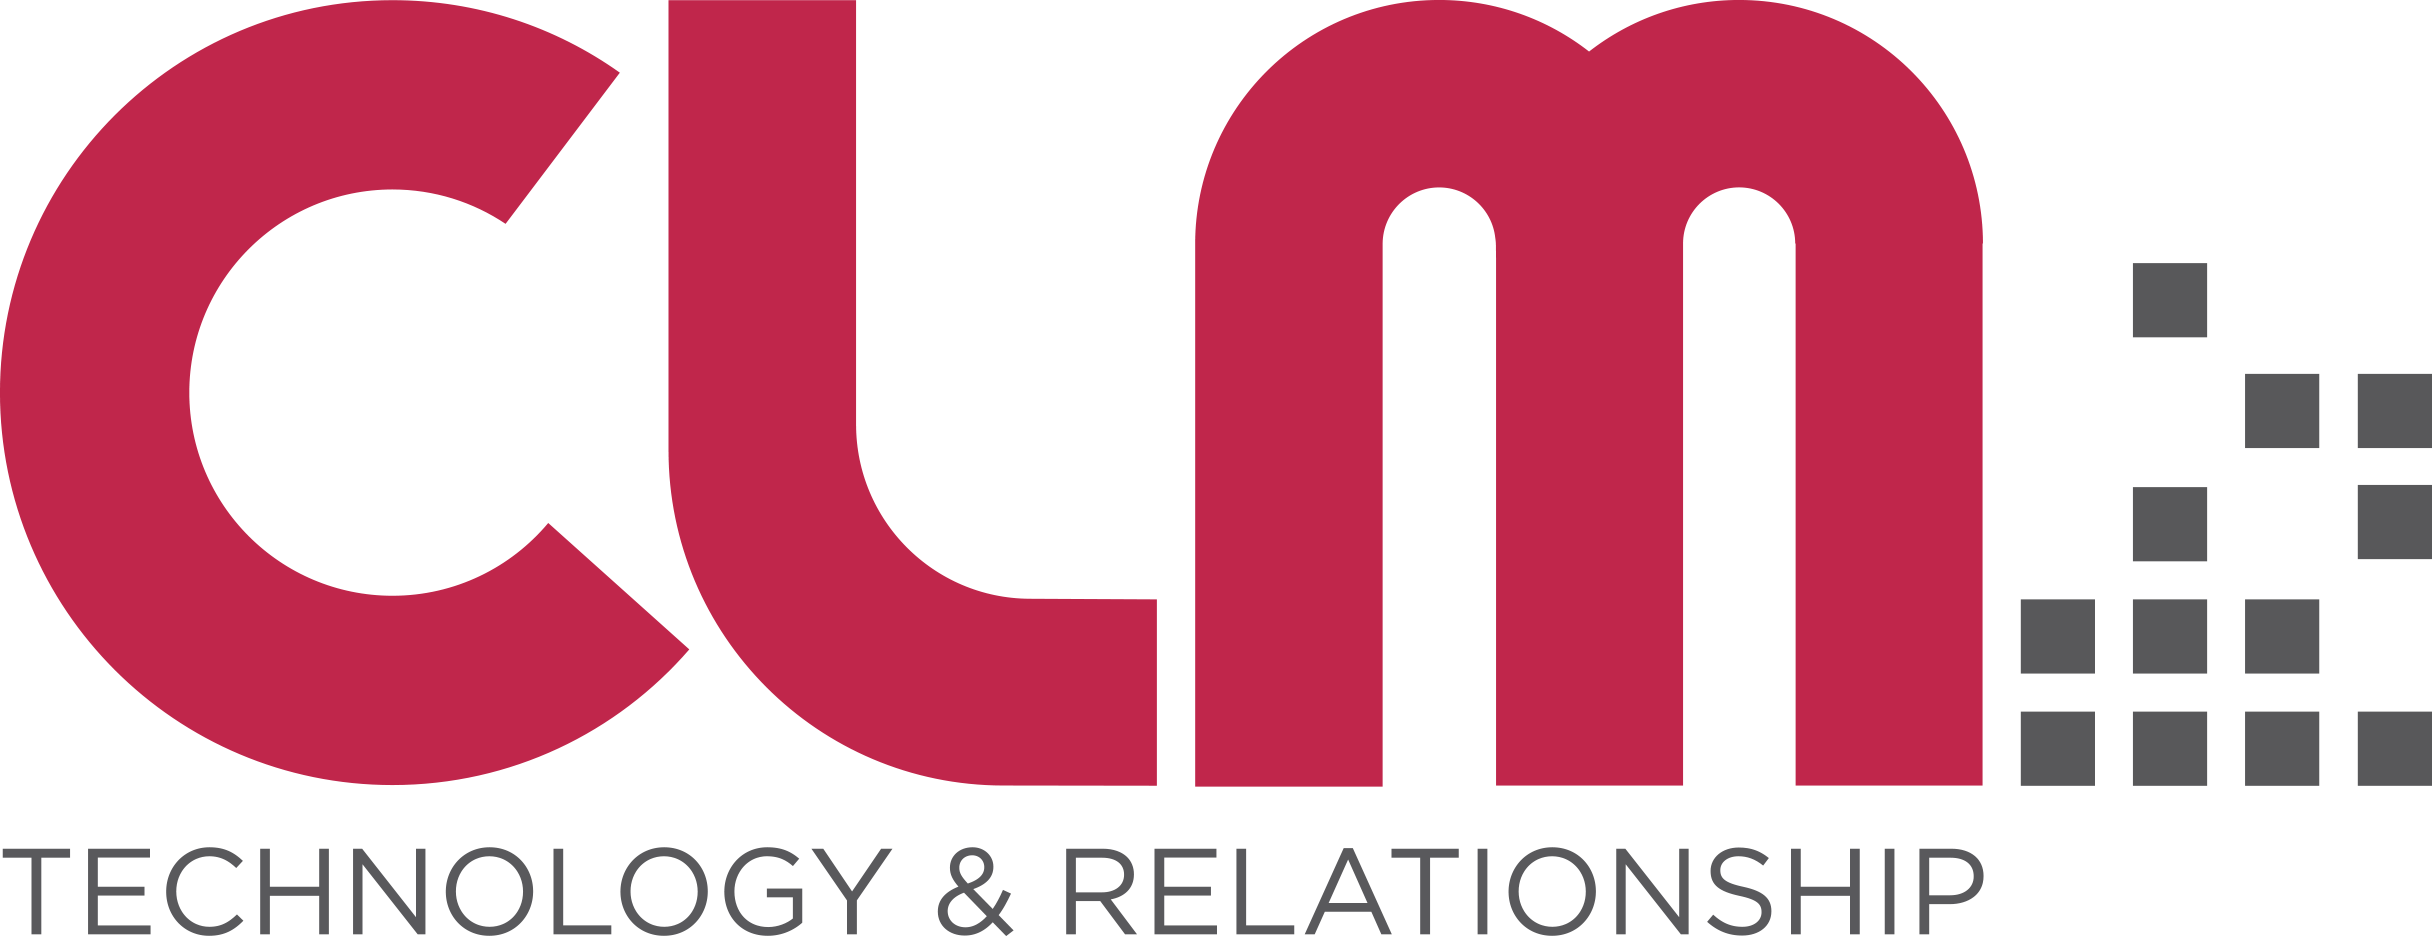 CLM - Technology & Relationship | Value Added Distributor